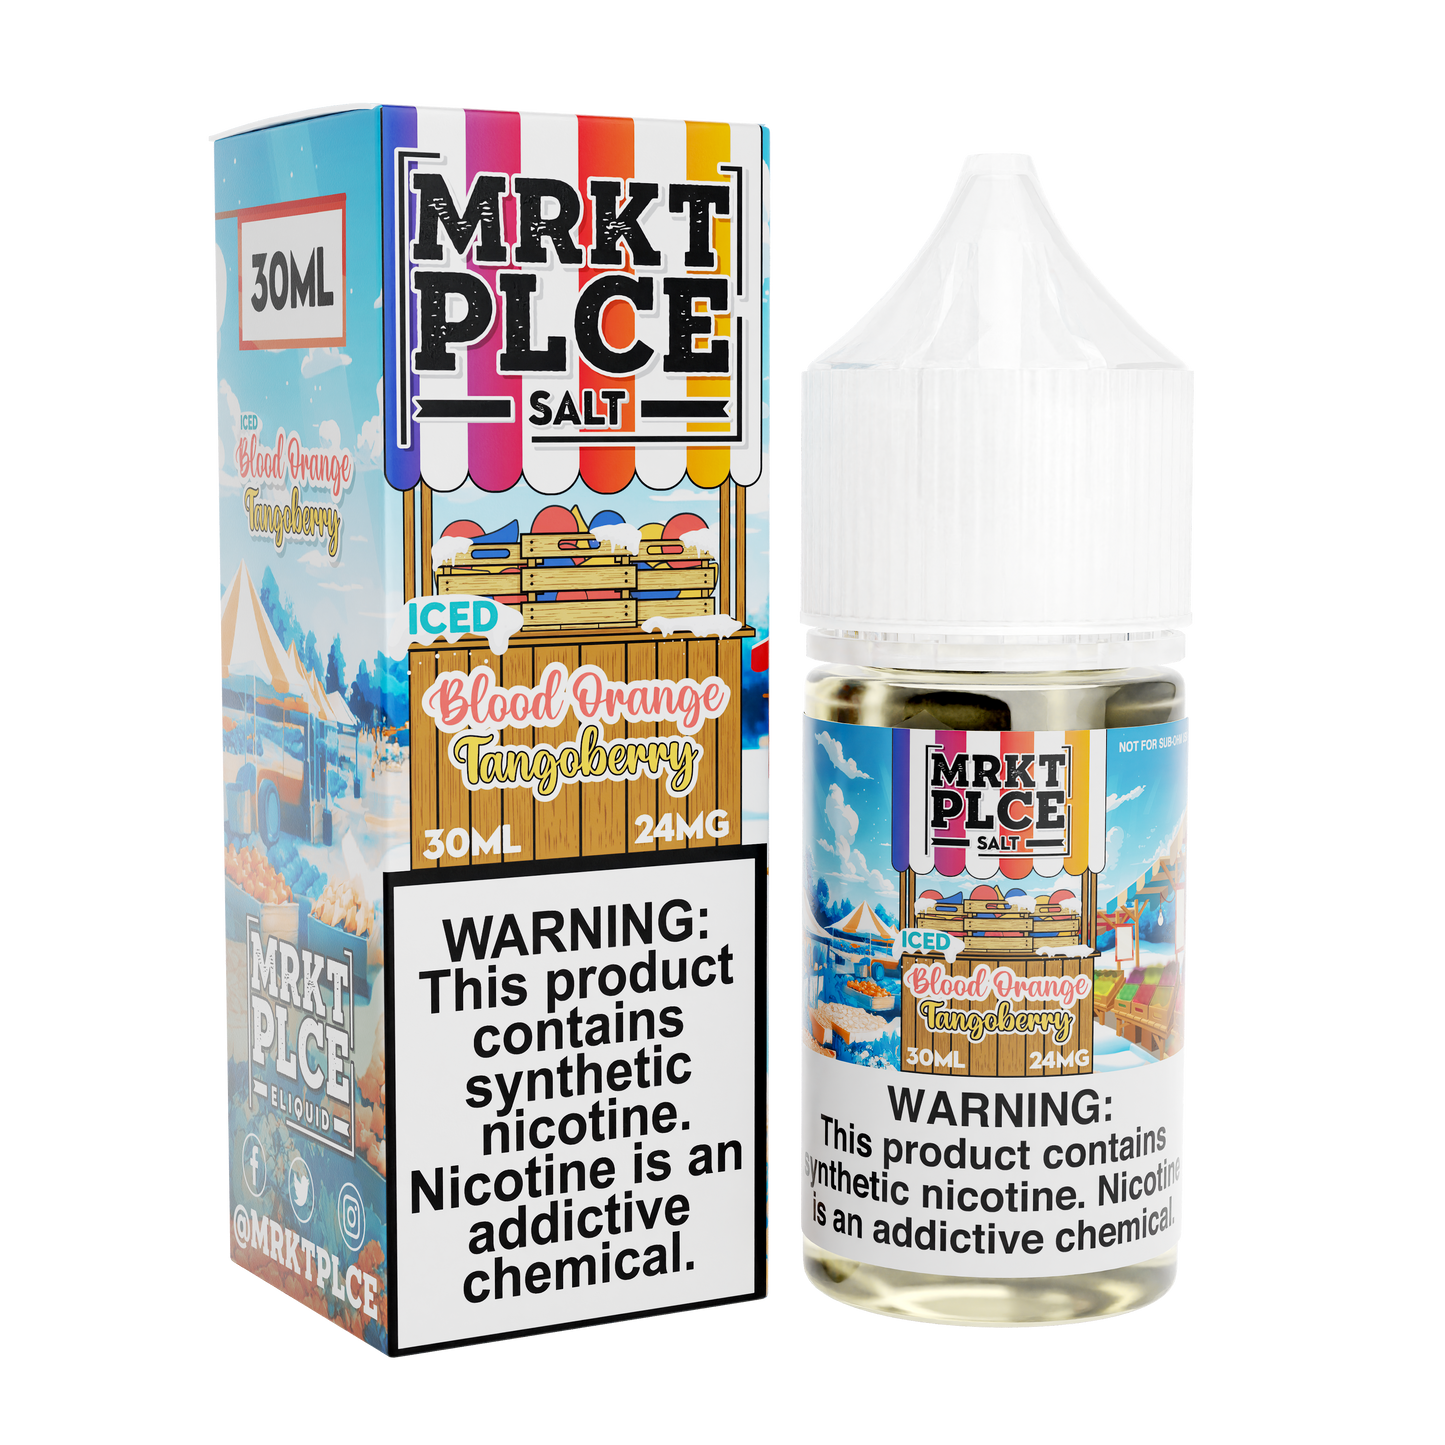 Iced Brazberry Grape Acai by MRKT PLCE Salts Series 30mL with Packaging